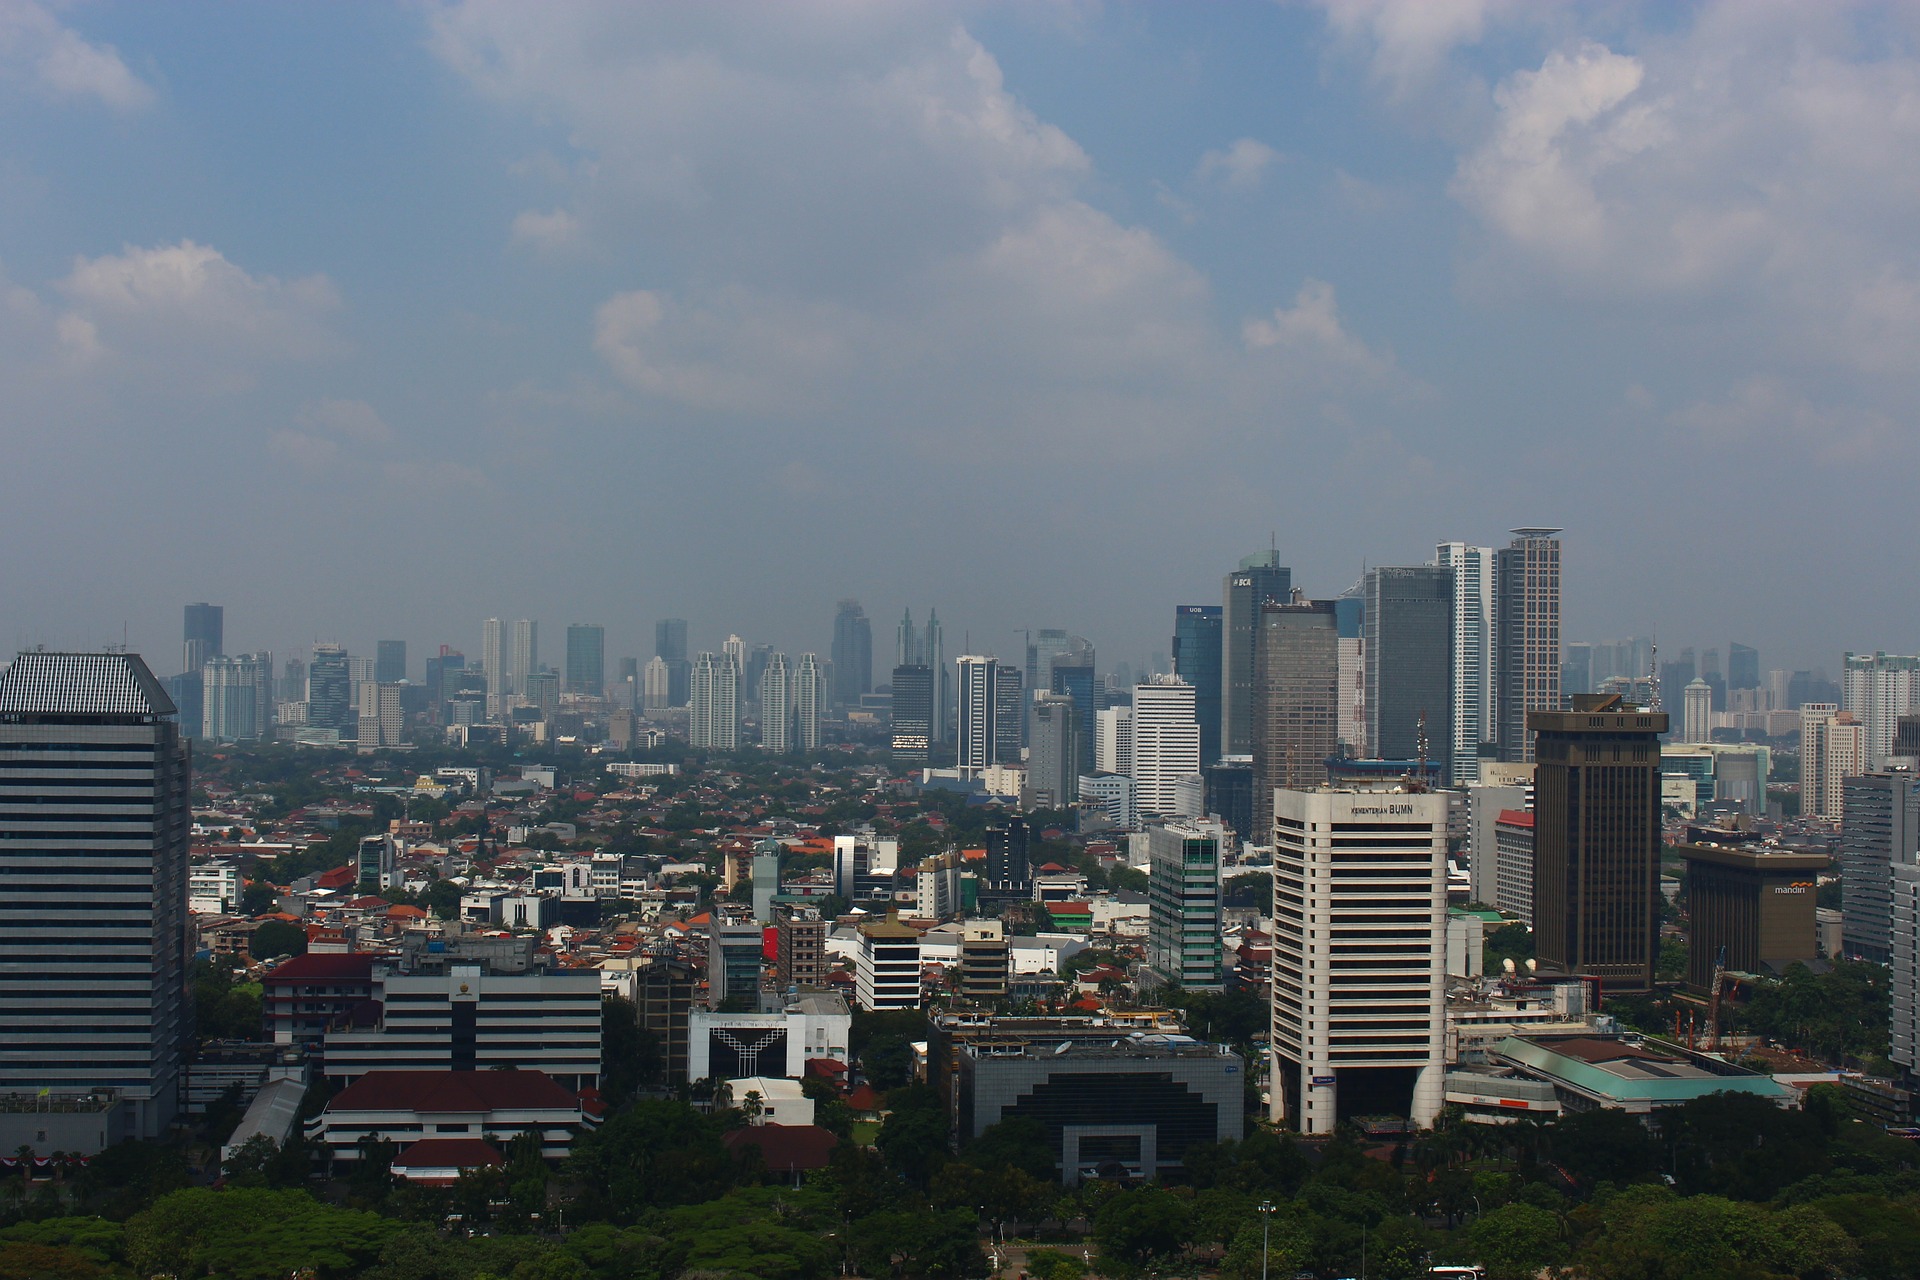 Top 20 Attractions And Things To Do In Jakarta, Indonesia